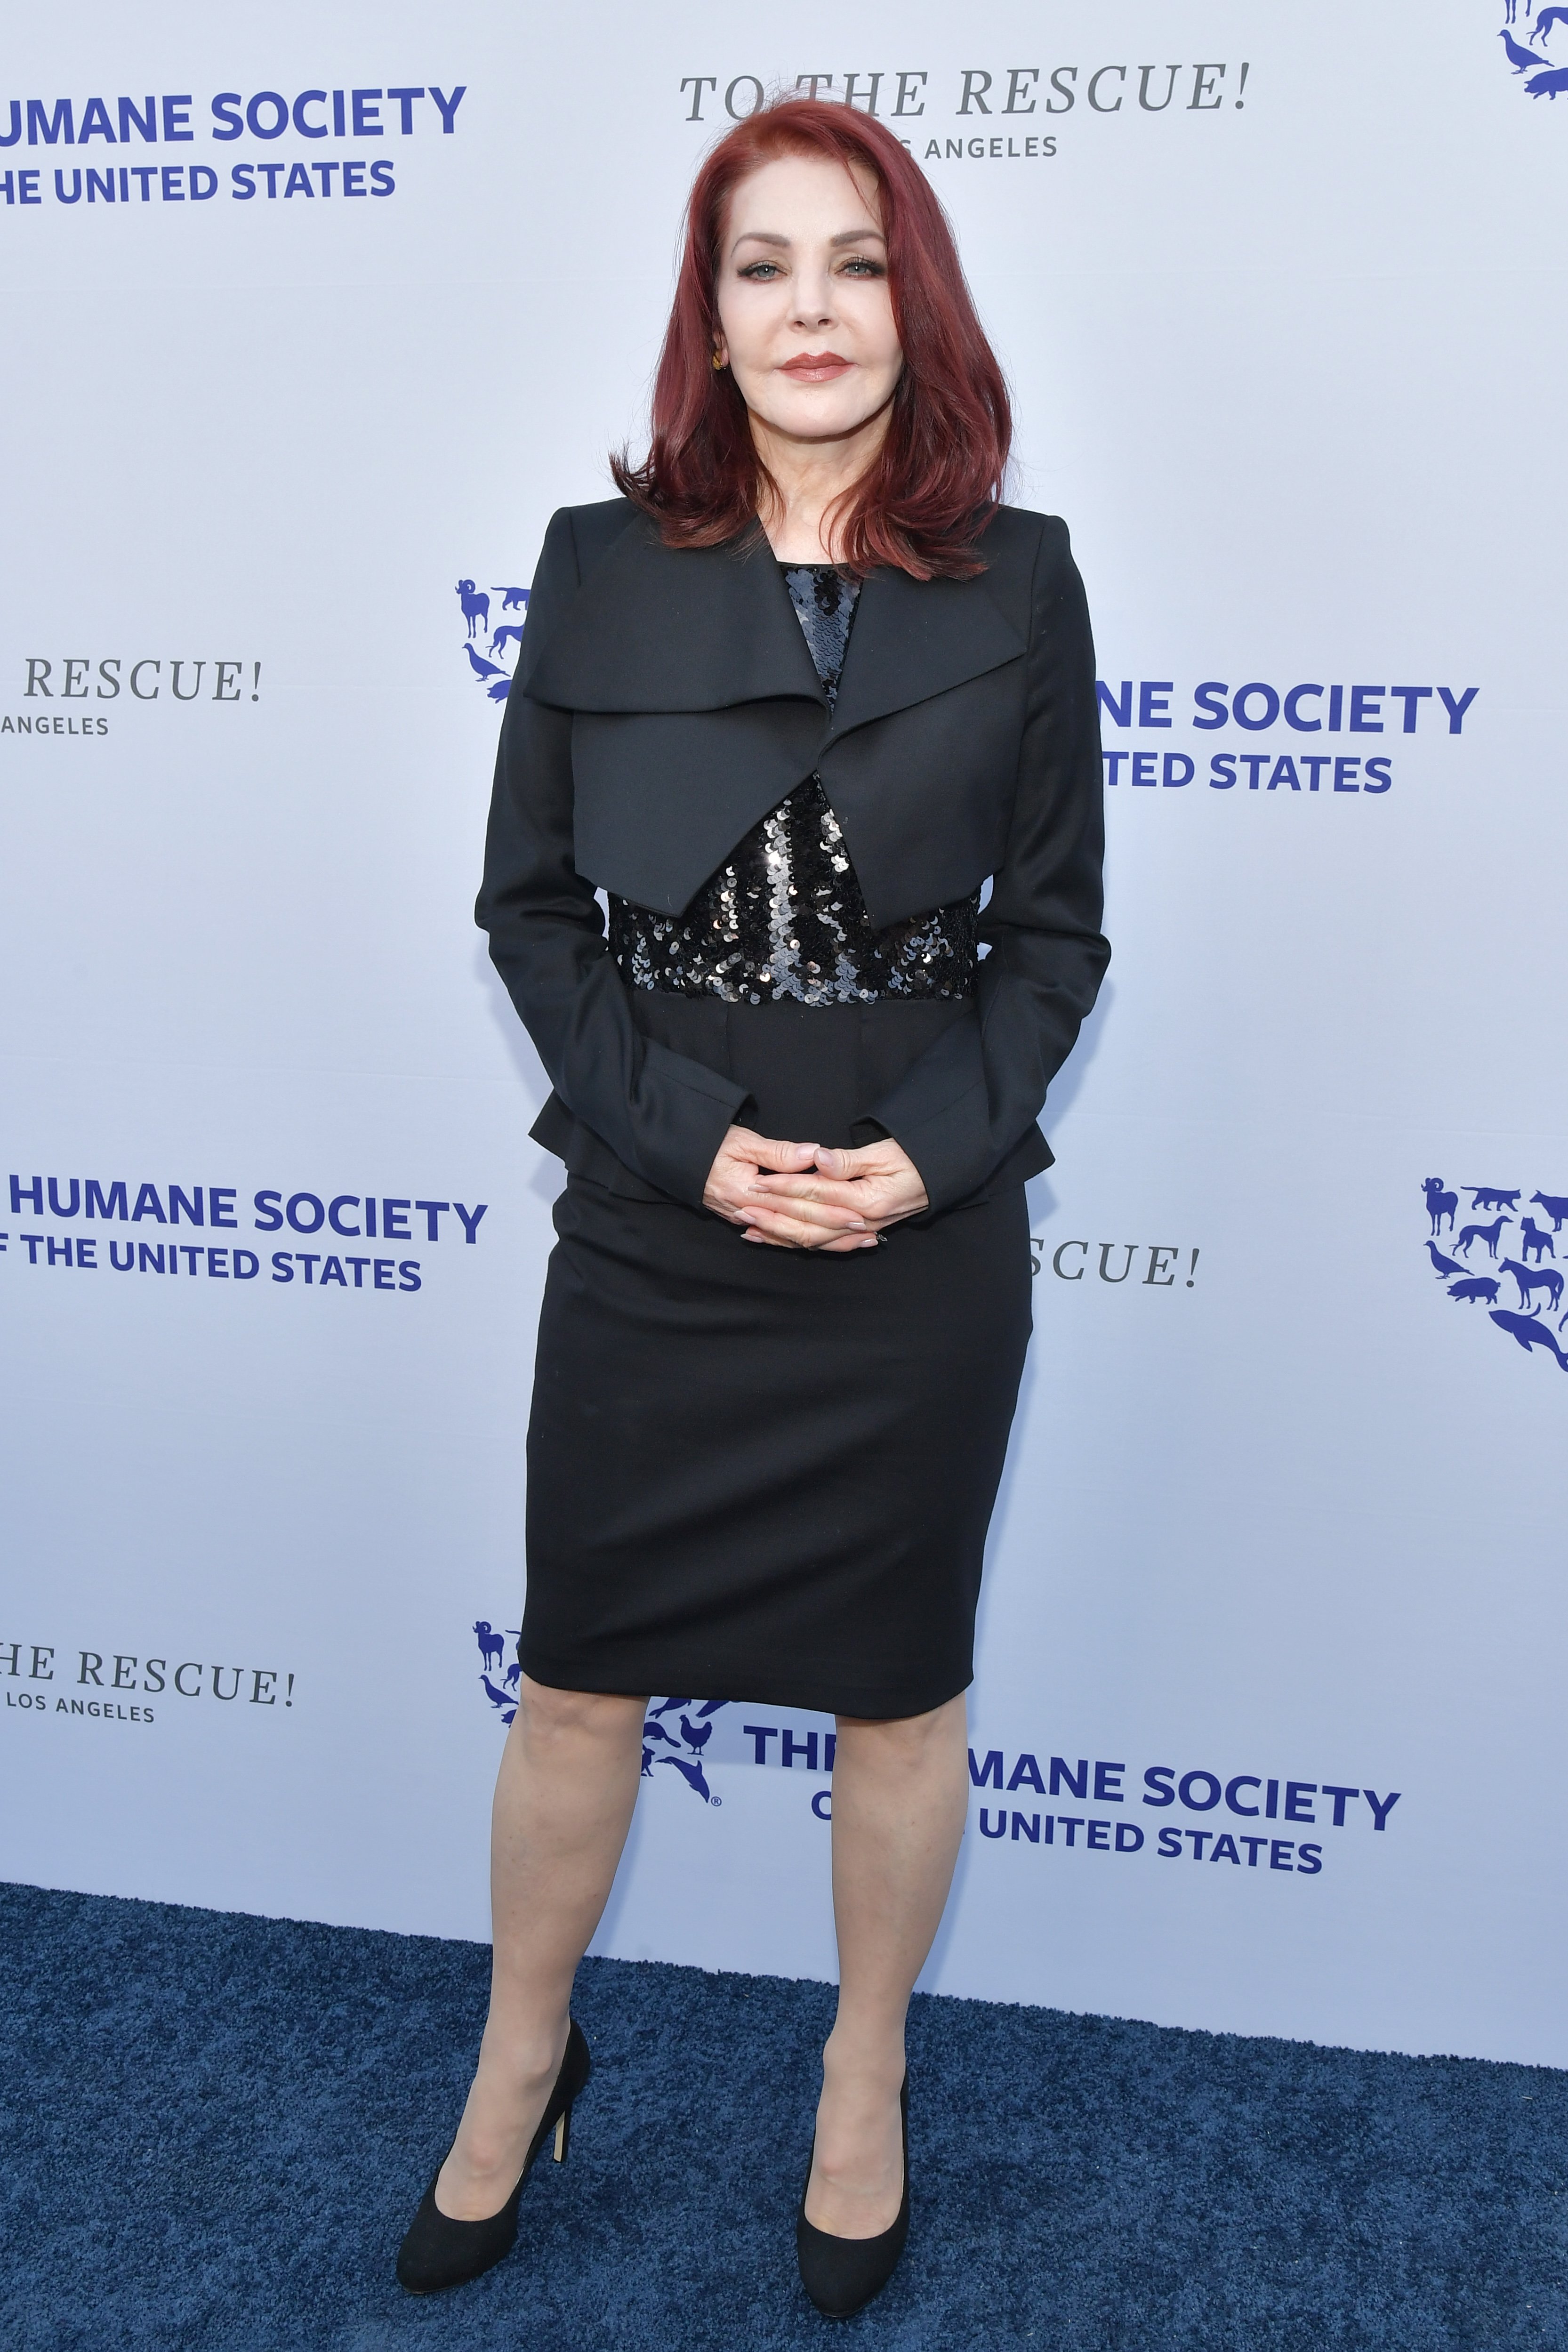 Priscilla Presley attends The Humane Society Of The United States To The Rescue! Los Angeles Gala on May 04, 2019, in Hollywood, California. | Source: Getty Images.